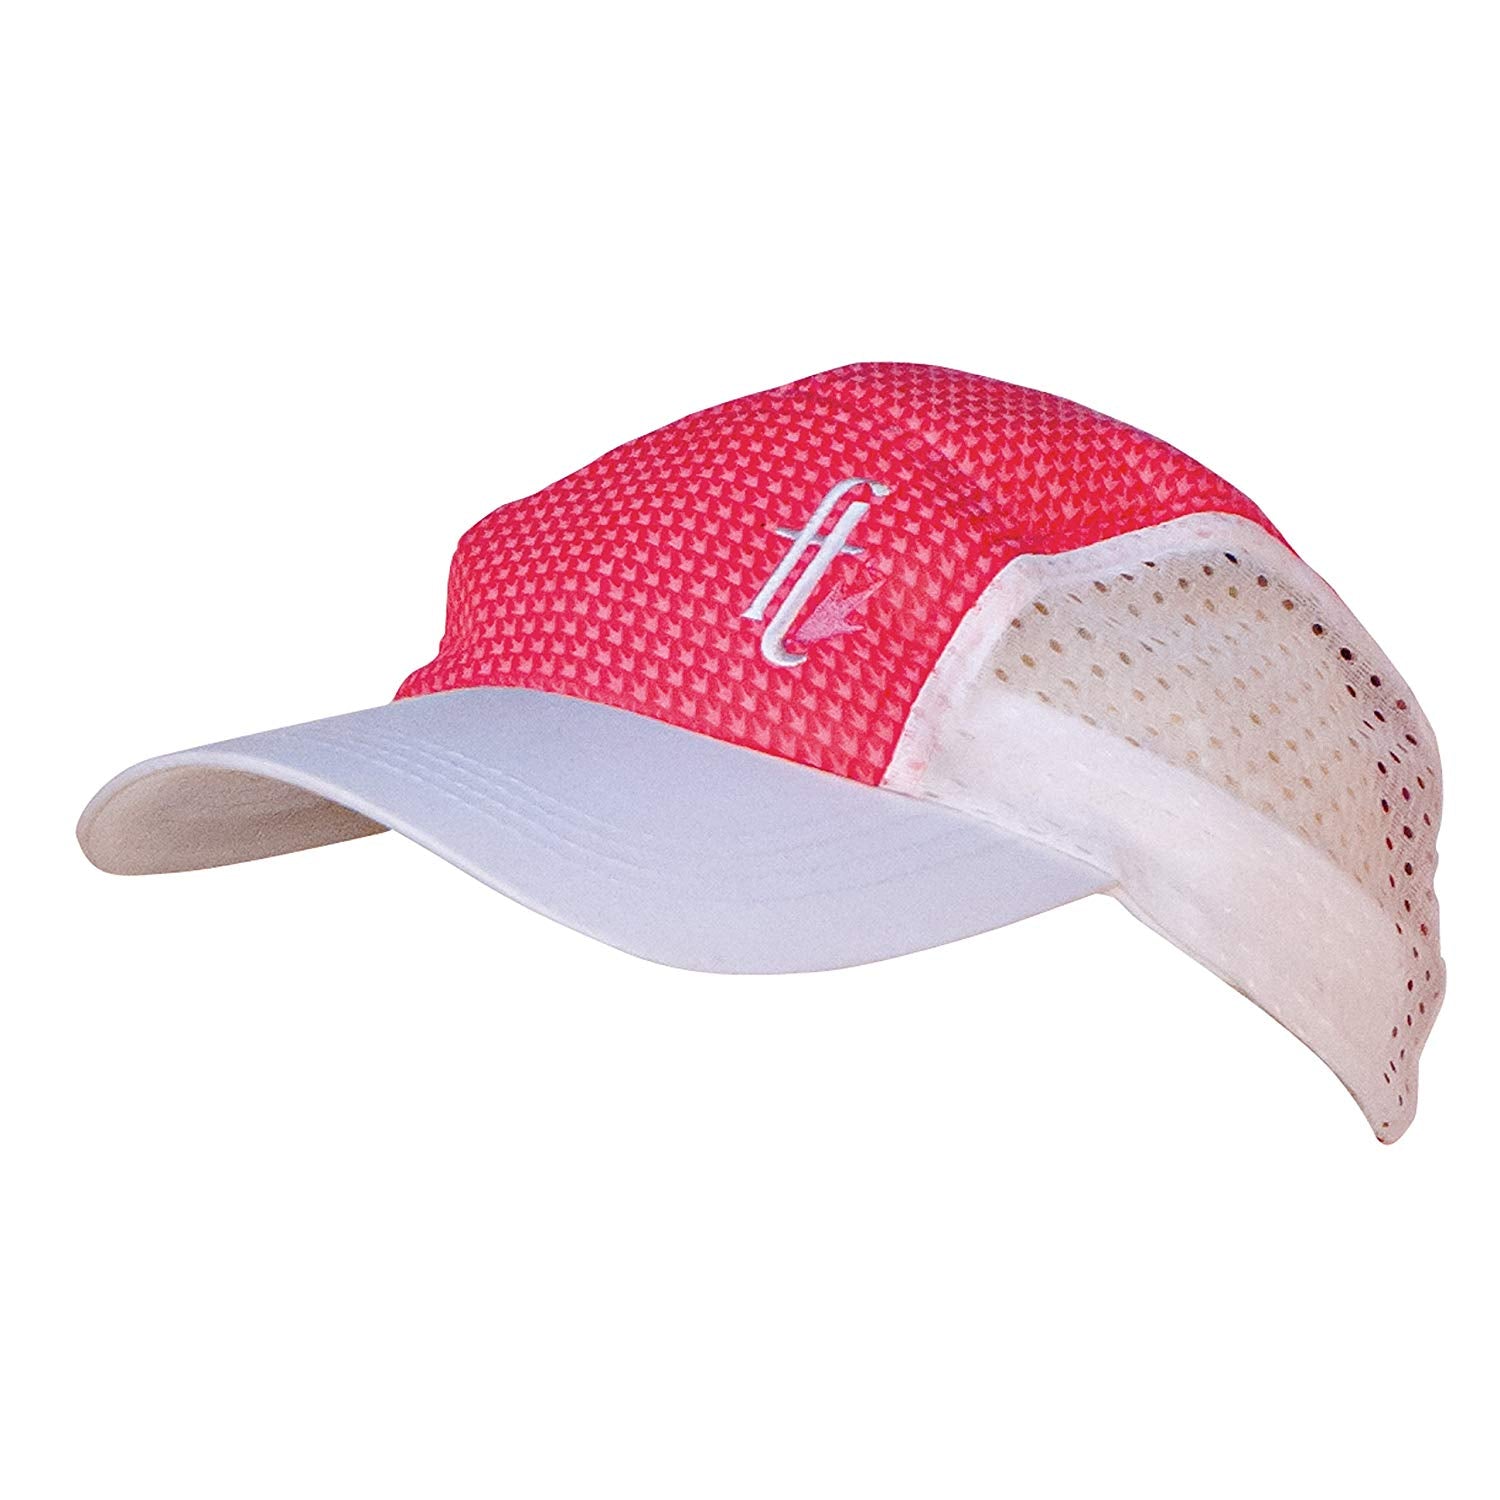 Frogg Toggs Chilly Bean Cooling Cap CBC300-311 [White/Pink,One Size]